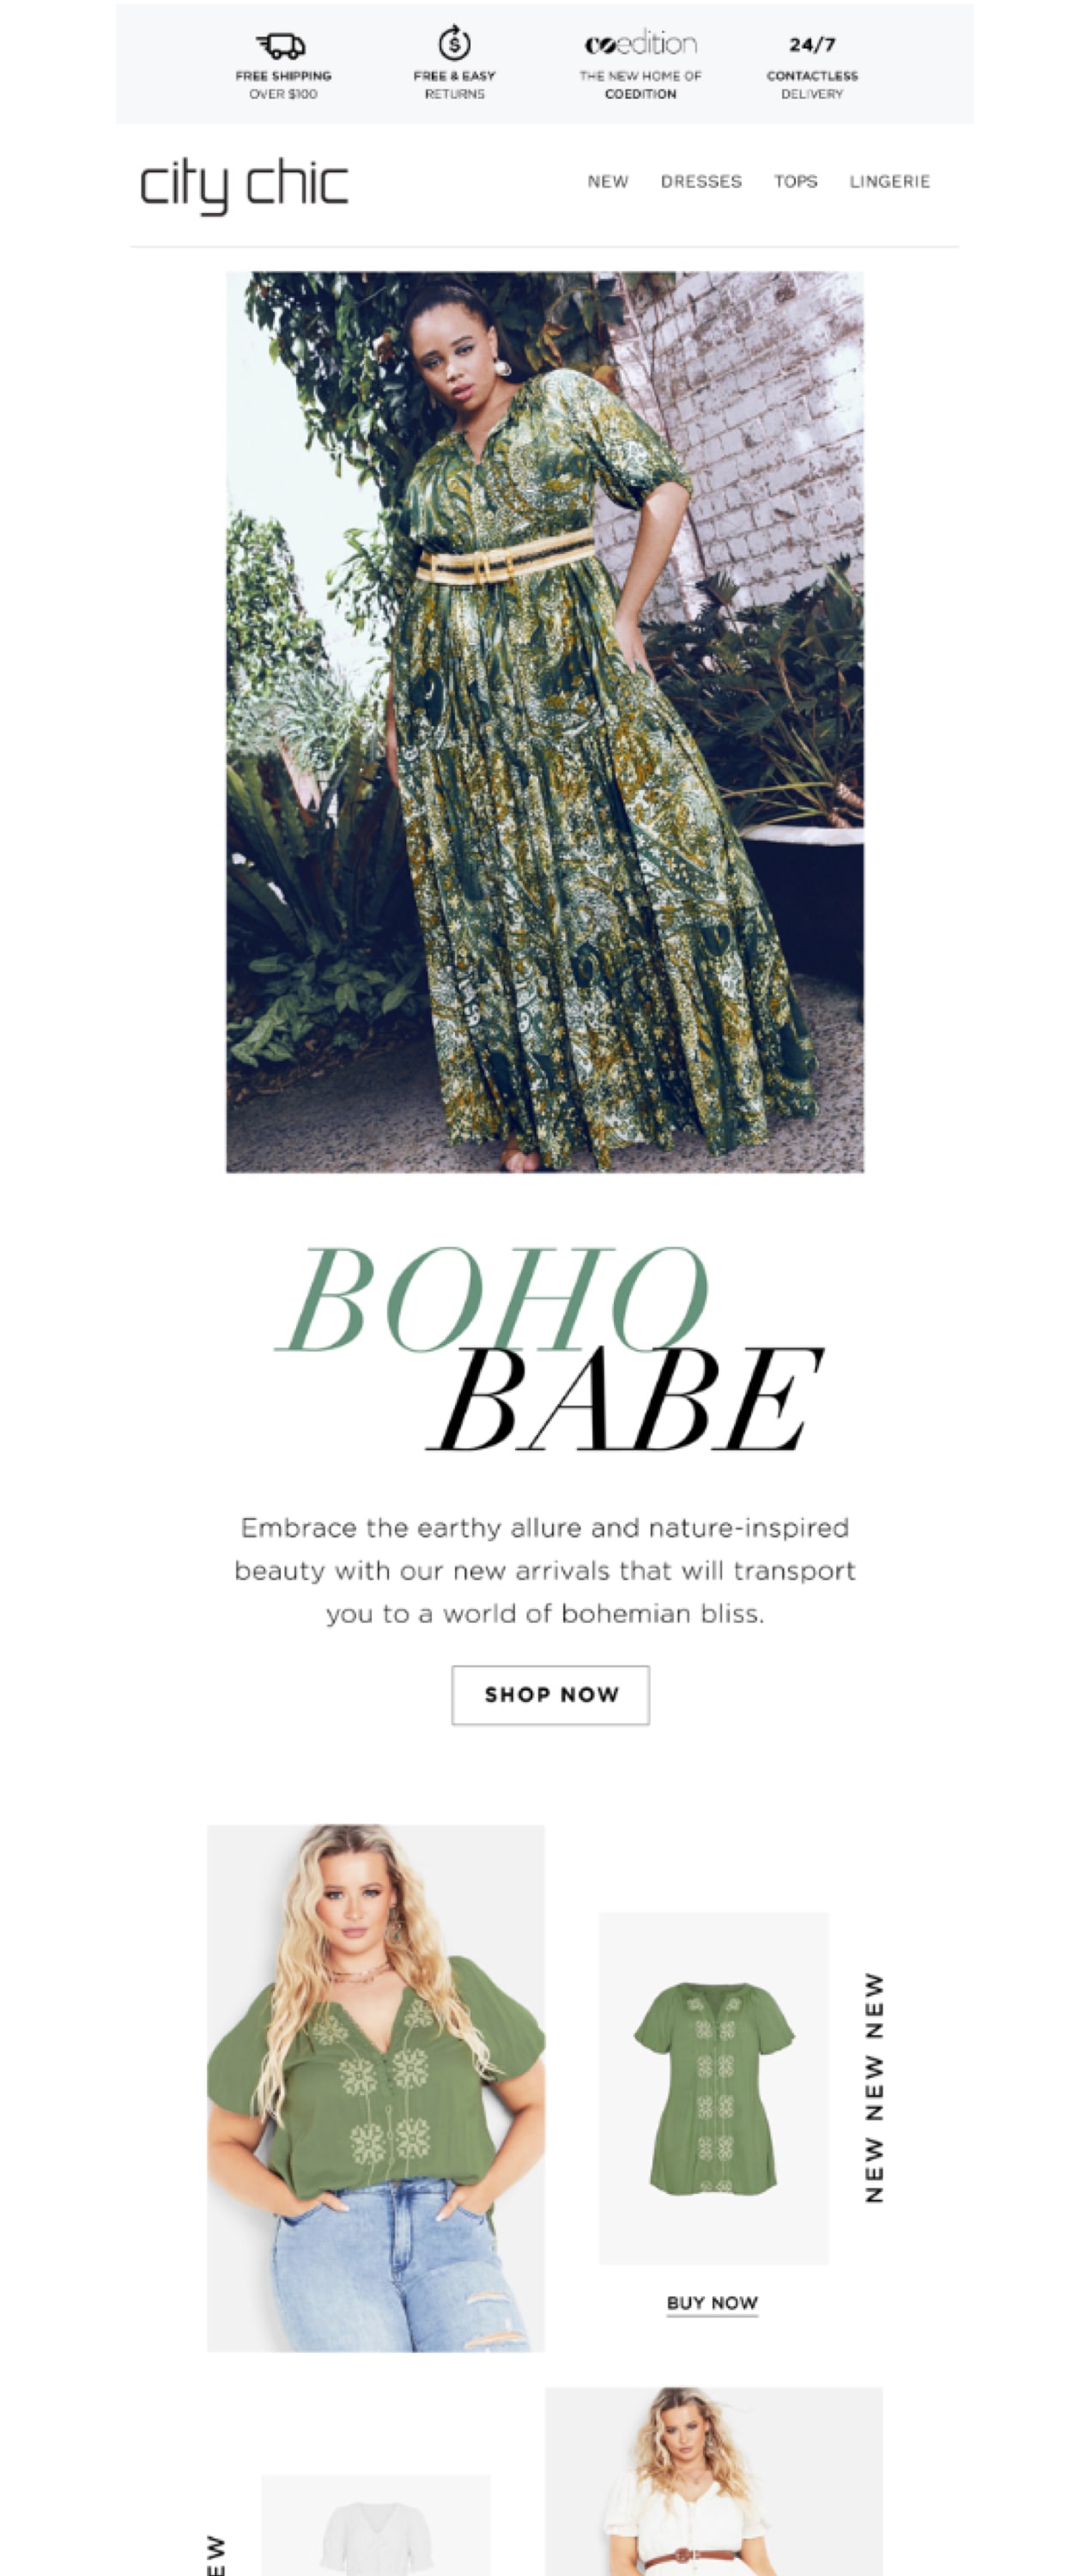 email from City Chic about products